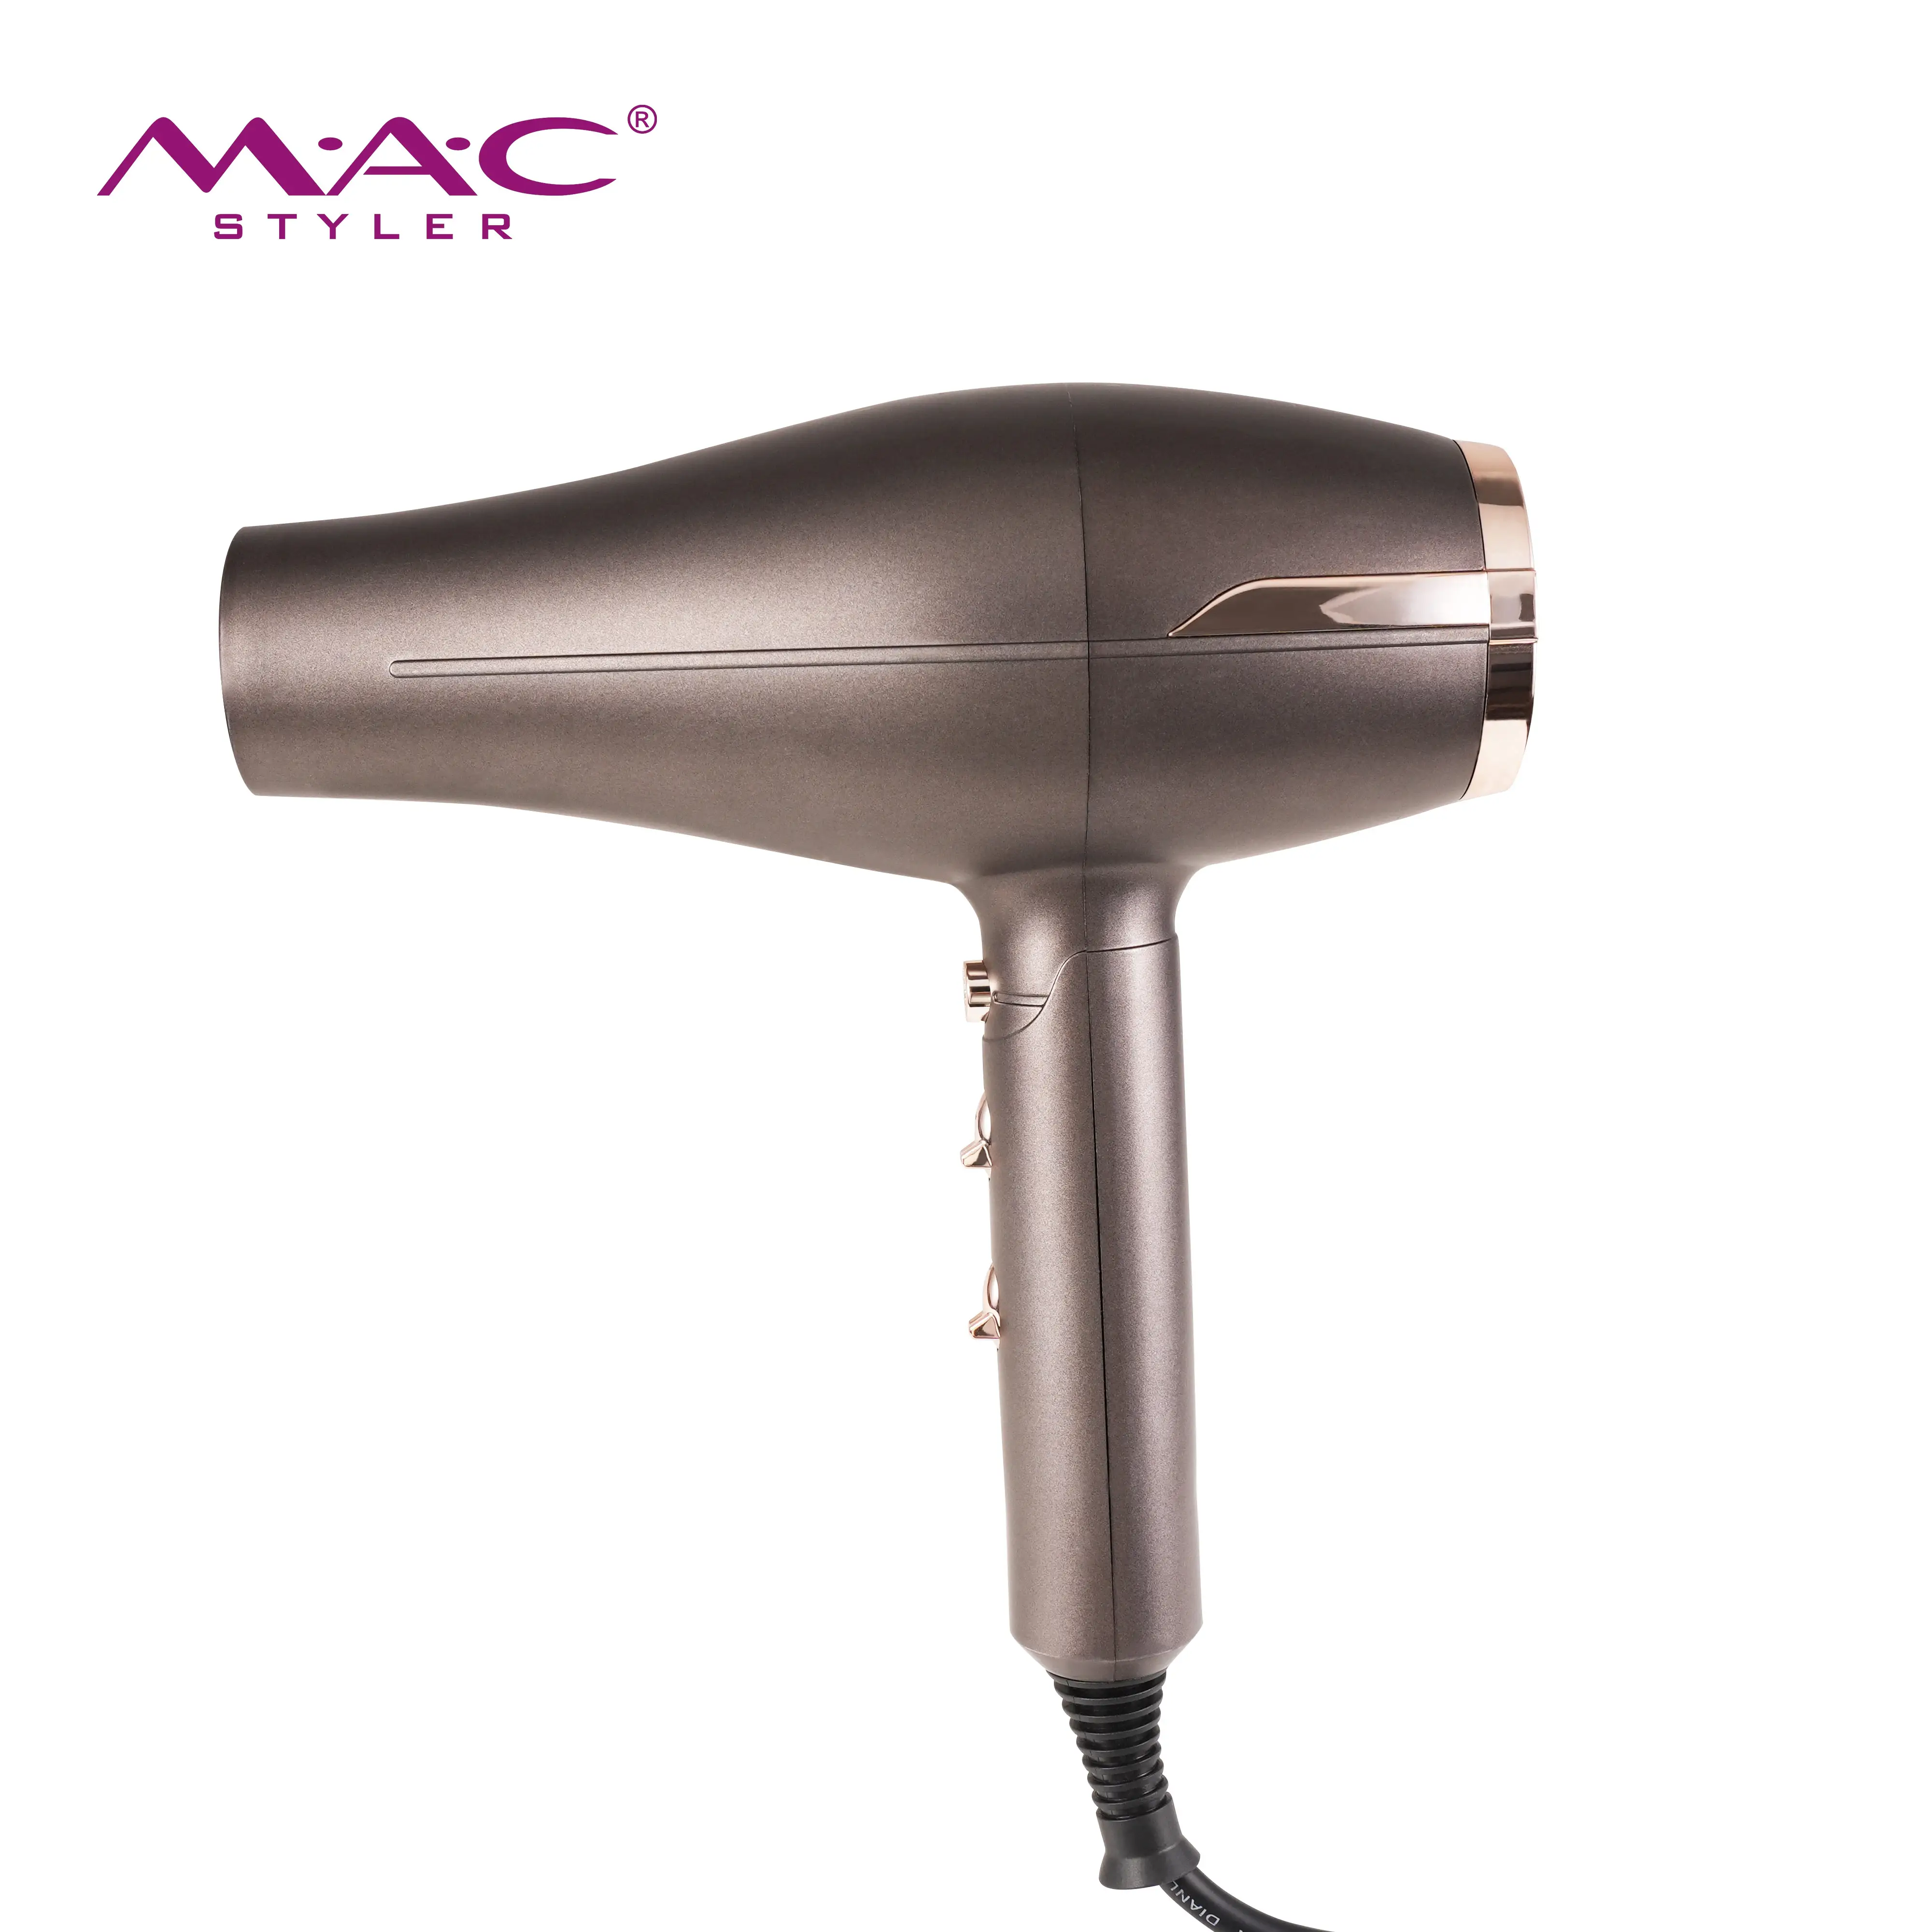 Fast Styling Luxury Hair Dryer Salon Lasting Care Customized Professional High Power Quick Drying Hair Dryer